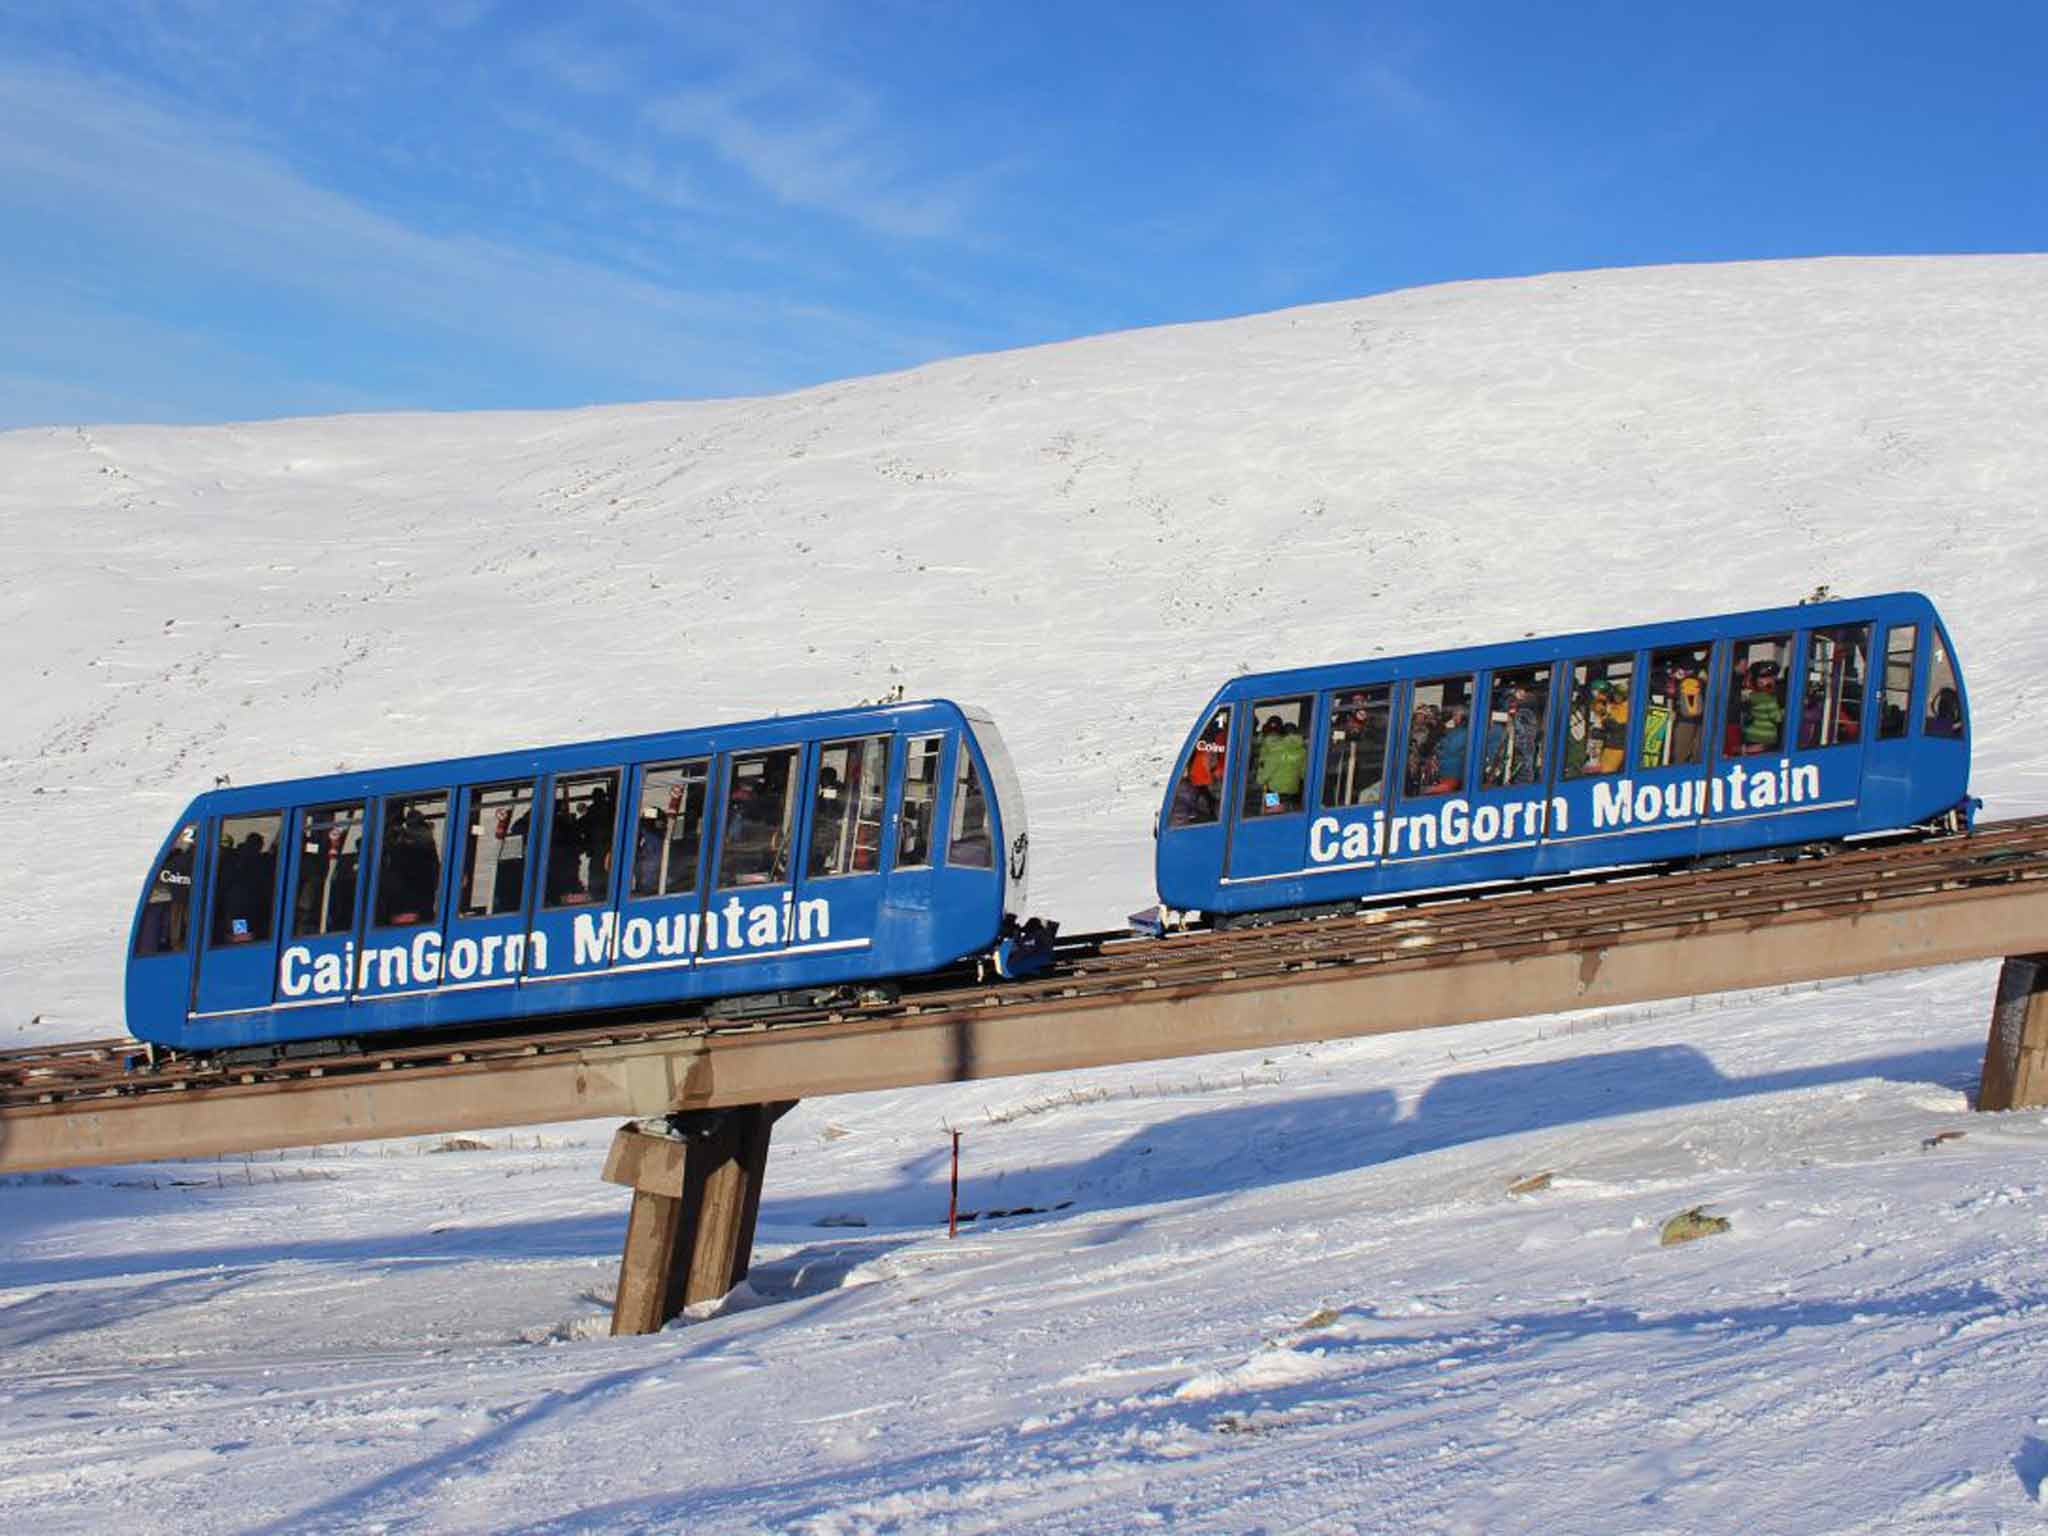 &#13;
The funicular railway at Cairngorm&#13;